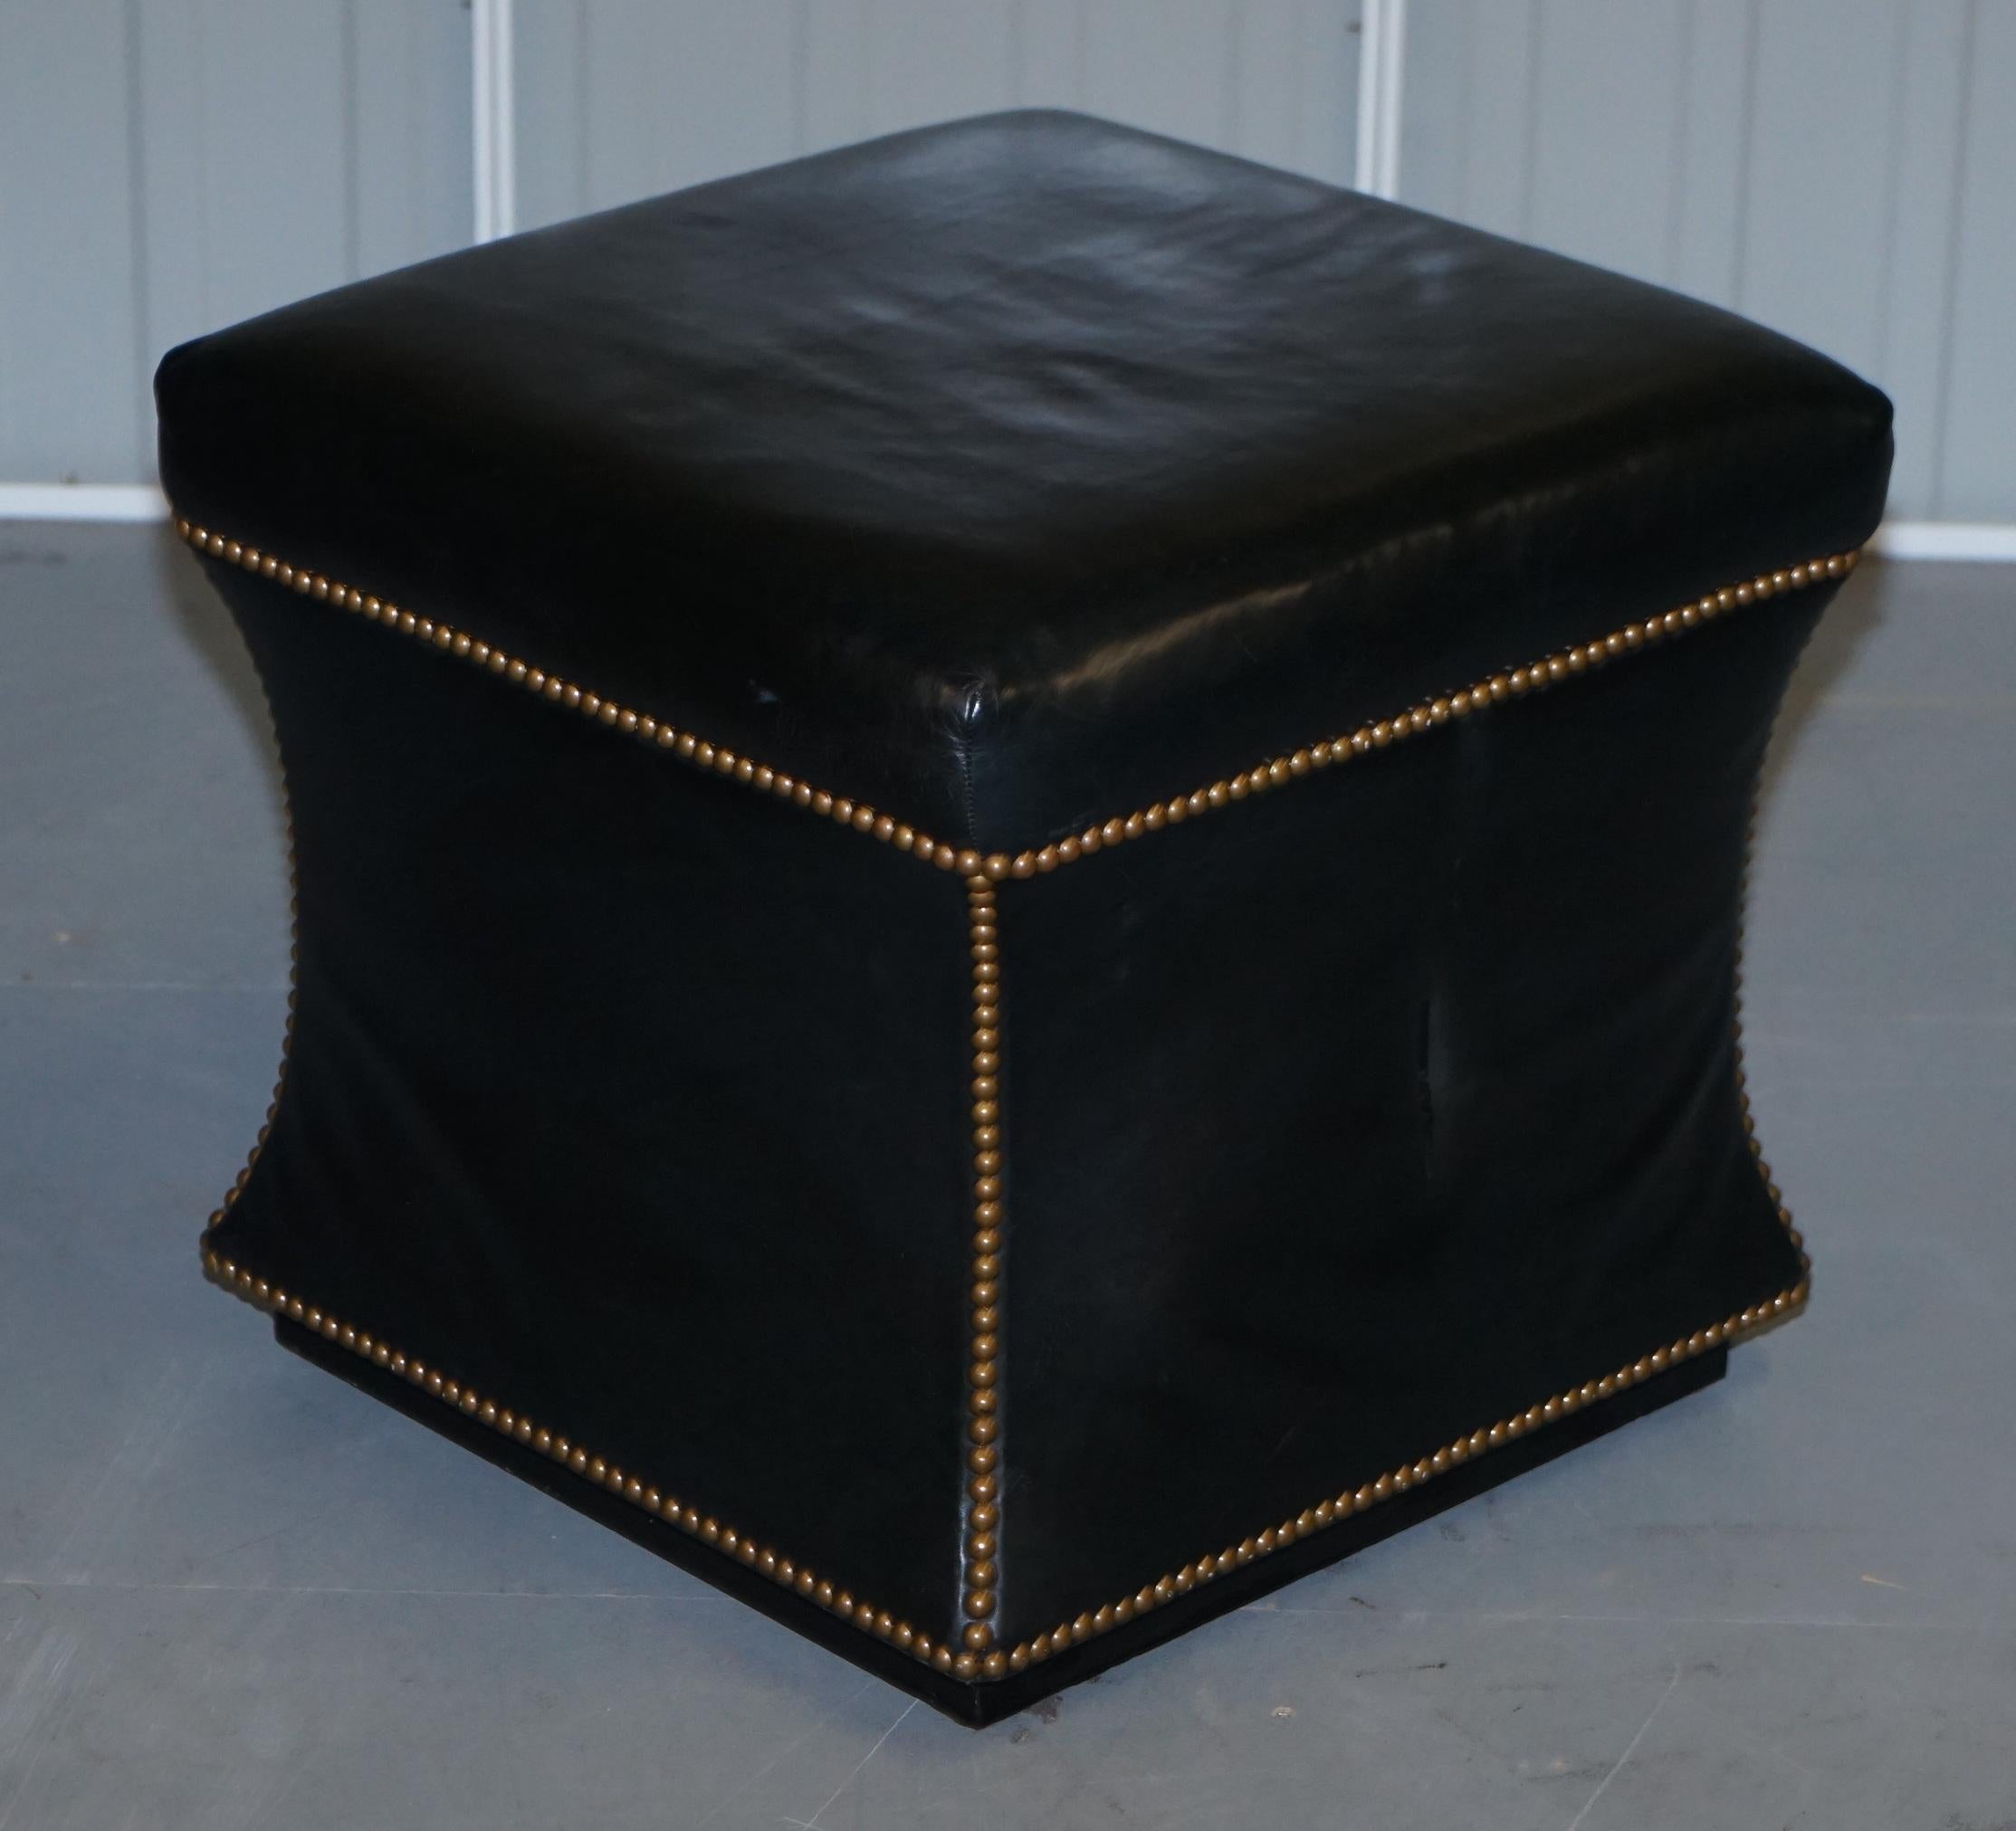 We are delighted to offer for sale this lovely Ralph Lauren black leather Florence ottoman stool

A good looking well made and expensive piece of luxury furniture. This design is based on the early Victorian ottomans which have the same sculptural